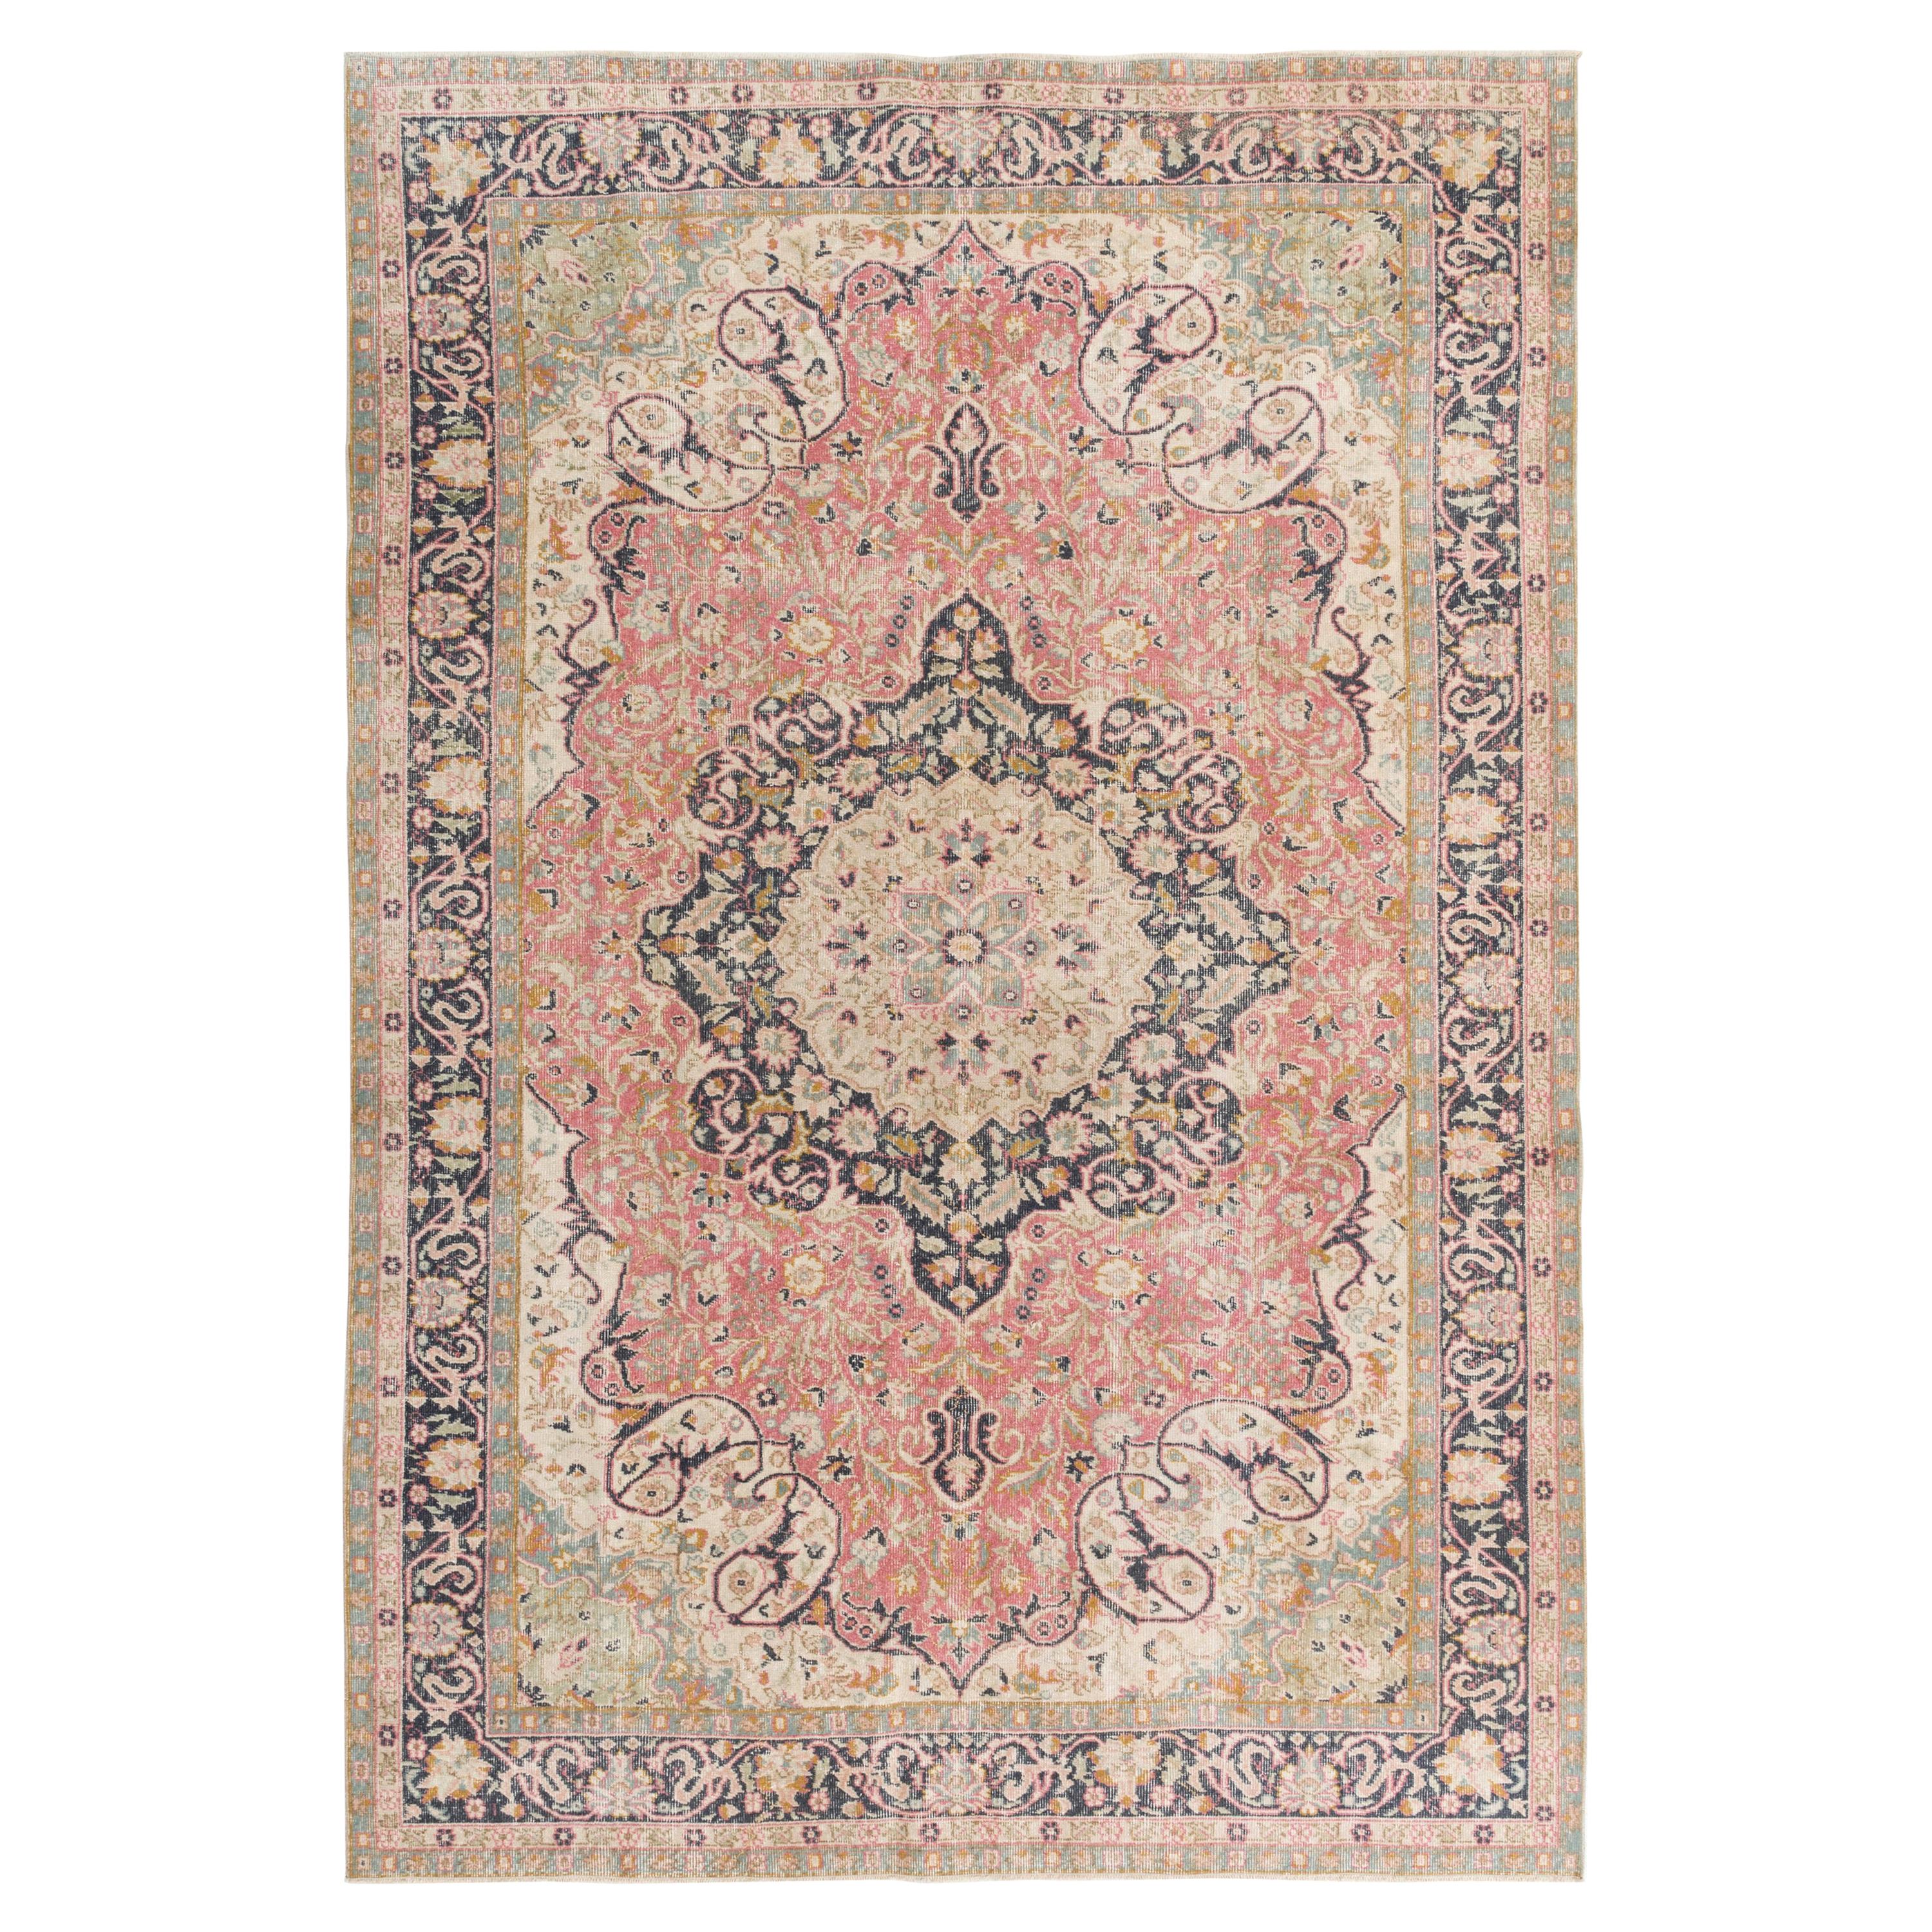 7x10 Ft Fine Semi-Antique Hand-Knotted Turkish Wool Rug in Soft Colors  For Sale